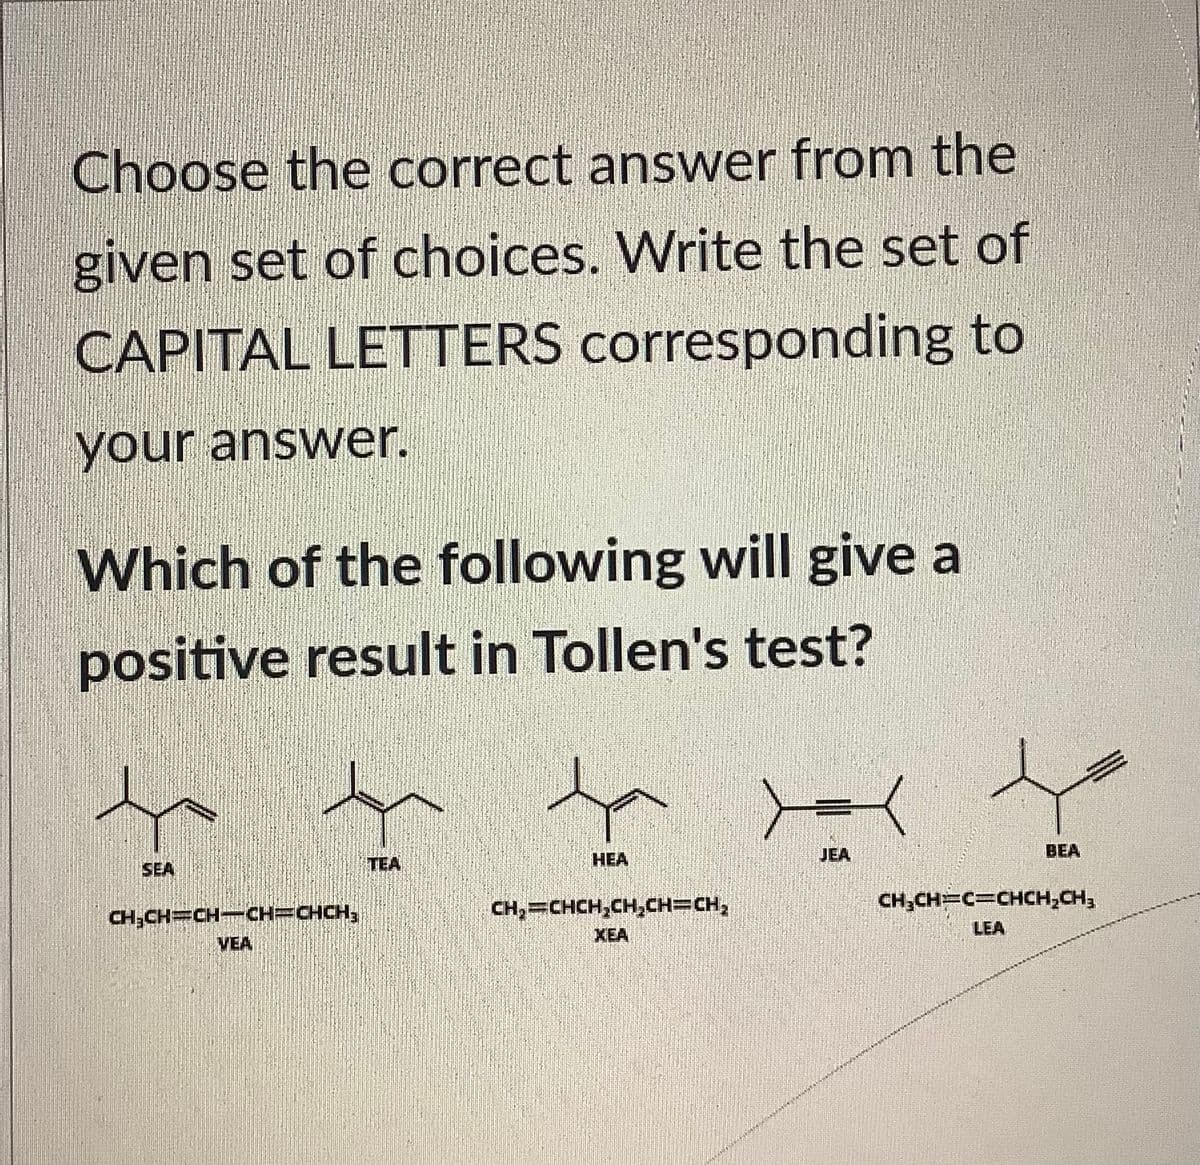 Choose the correct answer from the
given set of choices. Write the set of
CAPITAL LETTERS corresponding to
your answer.
Which of the following will give a
positive result in Tollen's test?
CH₂CH=CH-CH=CHCH₂
VEA
TEA
HEA
CH₂=CHCH₂CH₂CH=CH₂
JEA
APAA ANAL
BEA
CH₂CH=C=CHCH₂CH₂
LEA